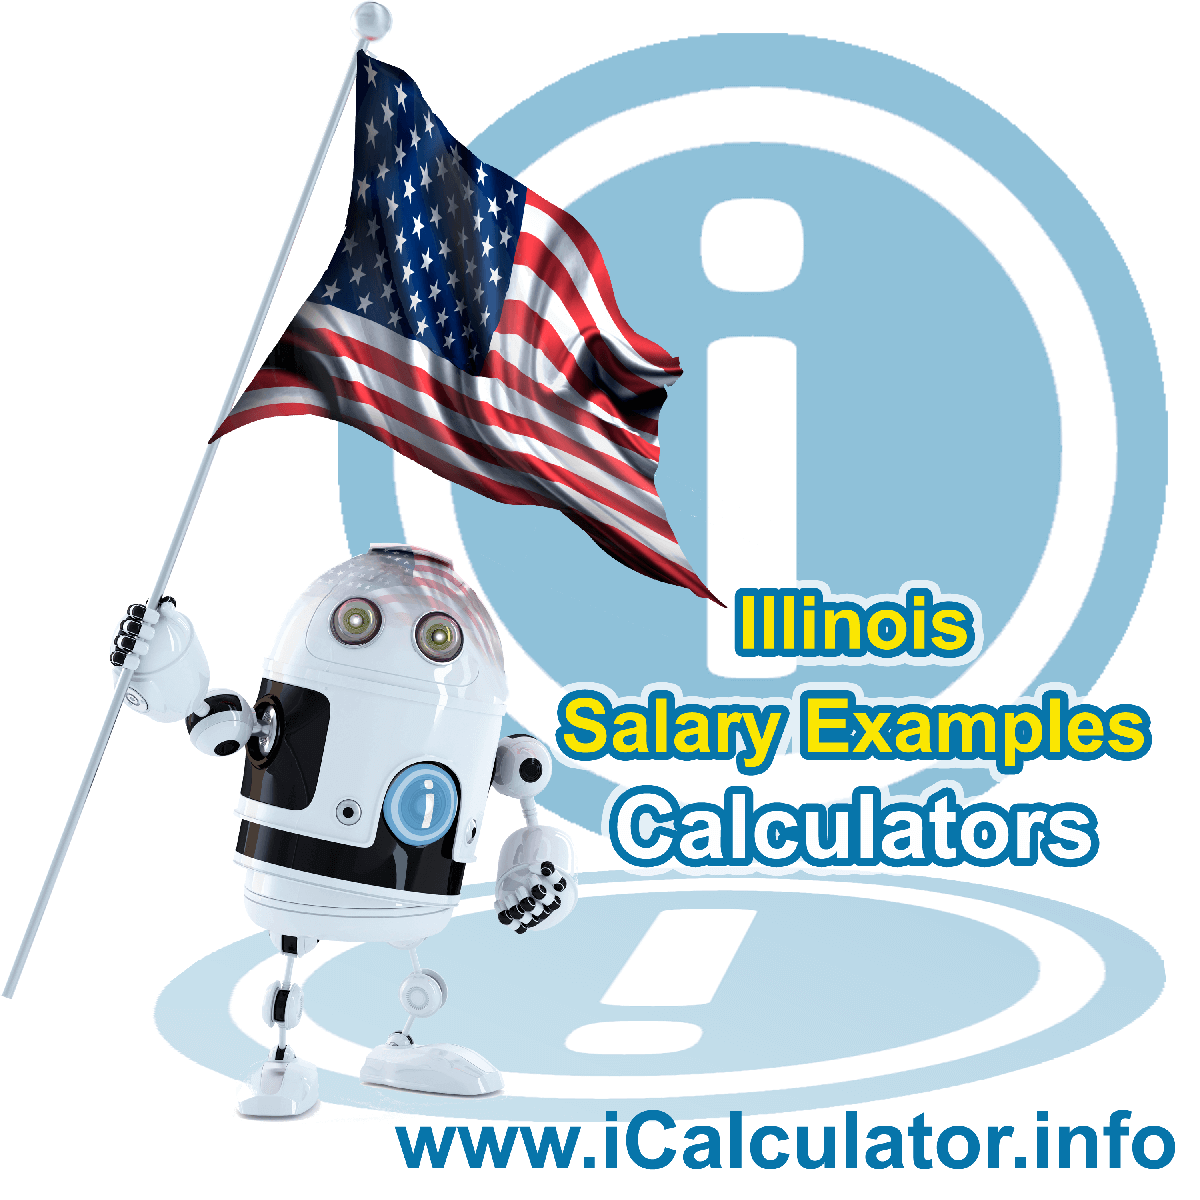 Illinois Salary Example for $ 160,000.00 in 2023 | iCalculator™ | $ 160,000.00 salary example for employee and employer paying Illinois State tincome taxes. Detailed salary after tax calculation including Illinois State Tax, Federal State Tax, Medicare Deductions, Social Security, Capital Gains and other income tax and salary deductions complete with supporting Illinois state tax tables 